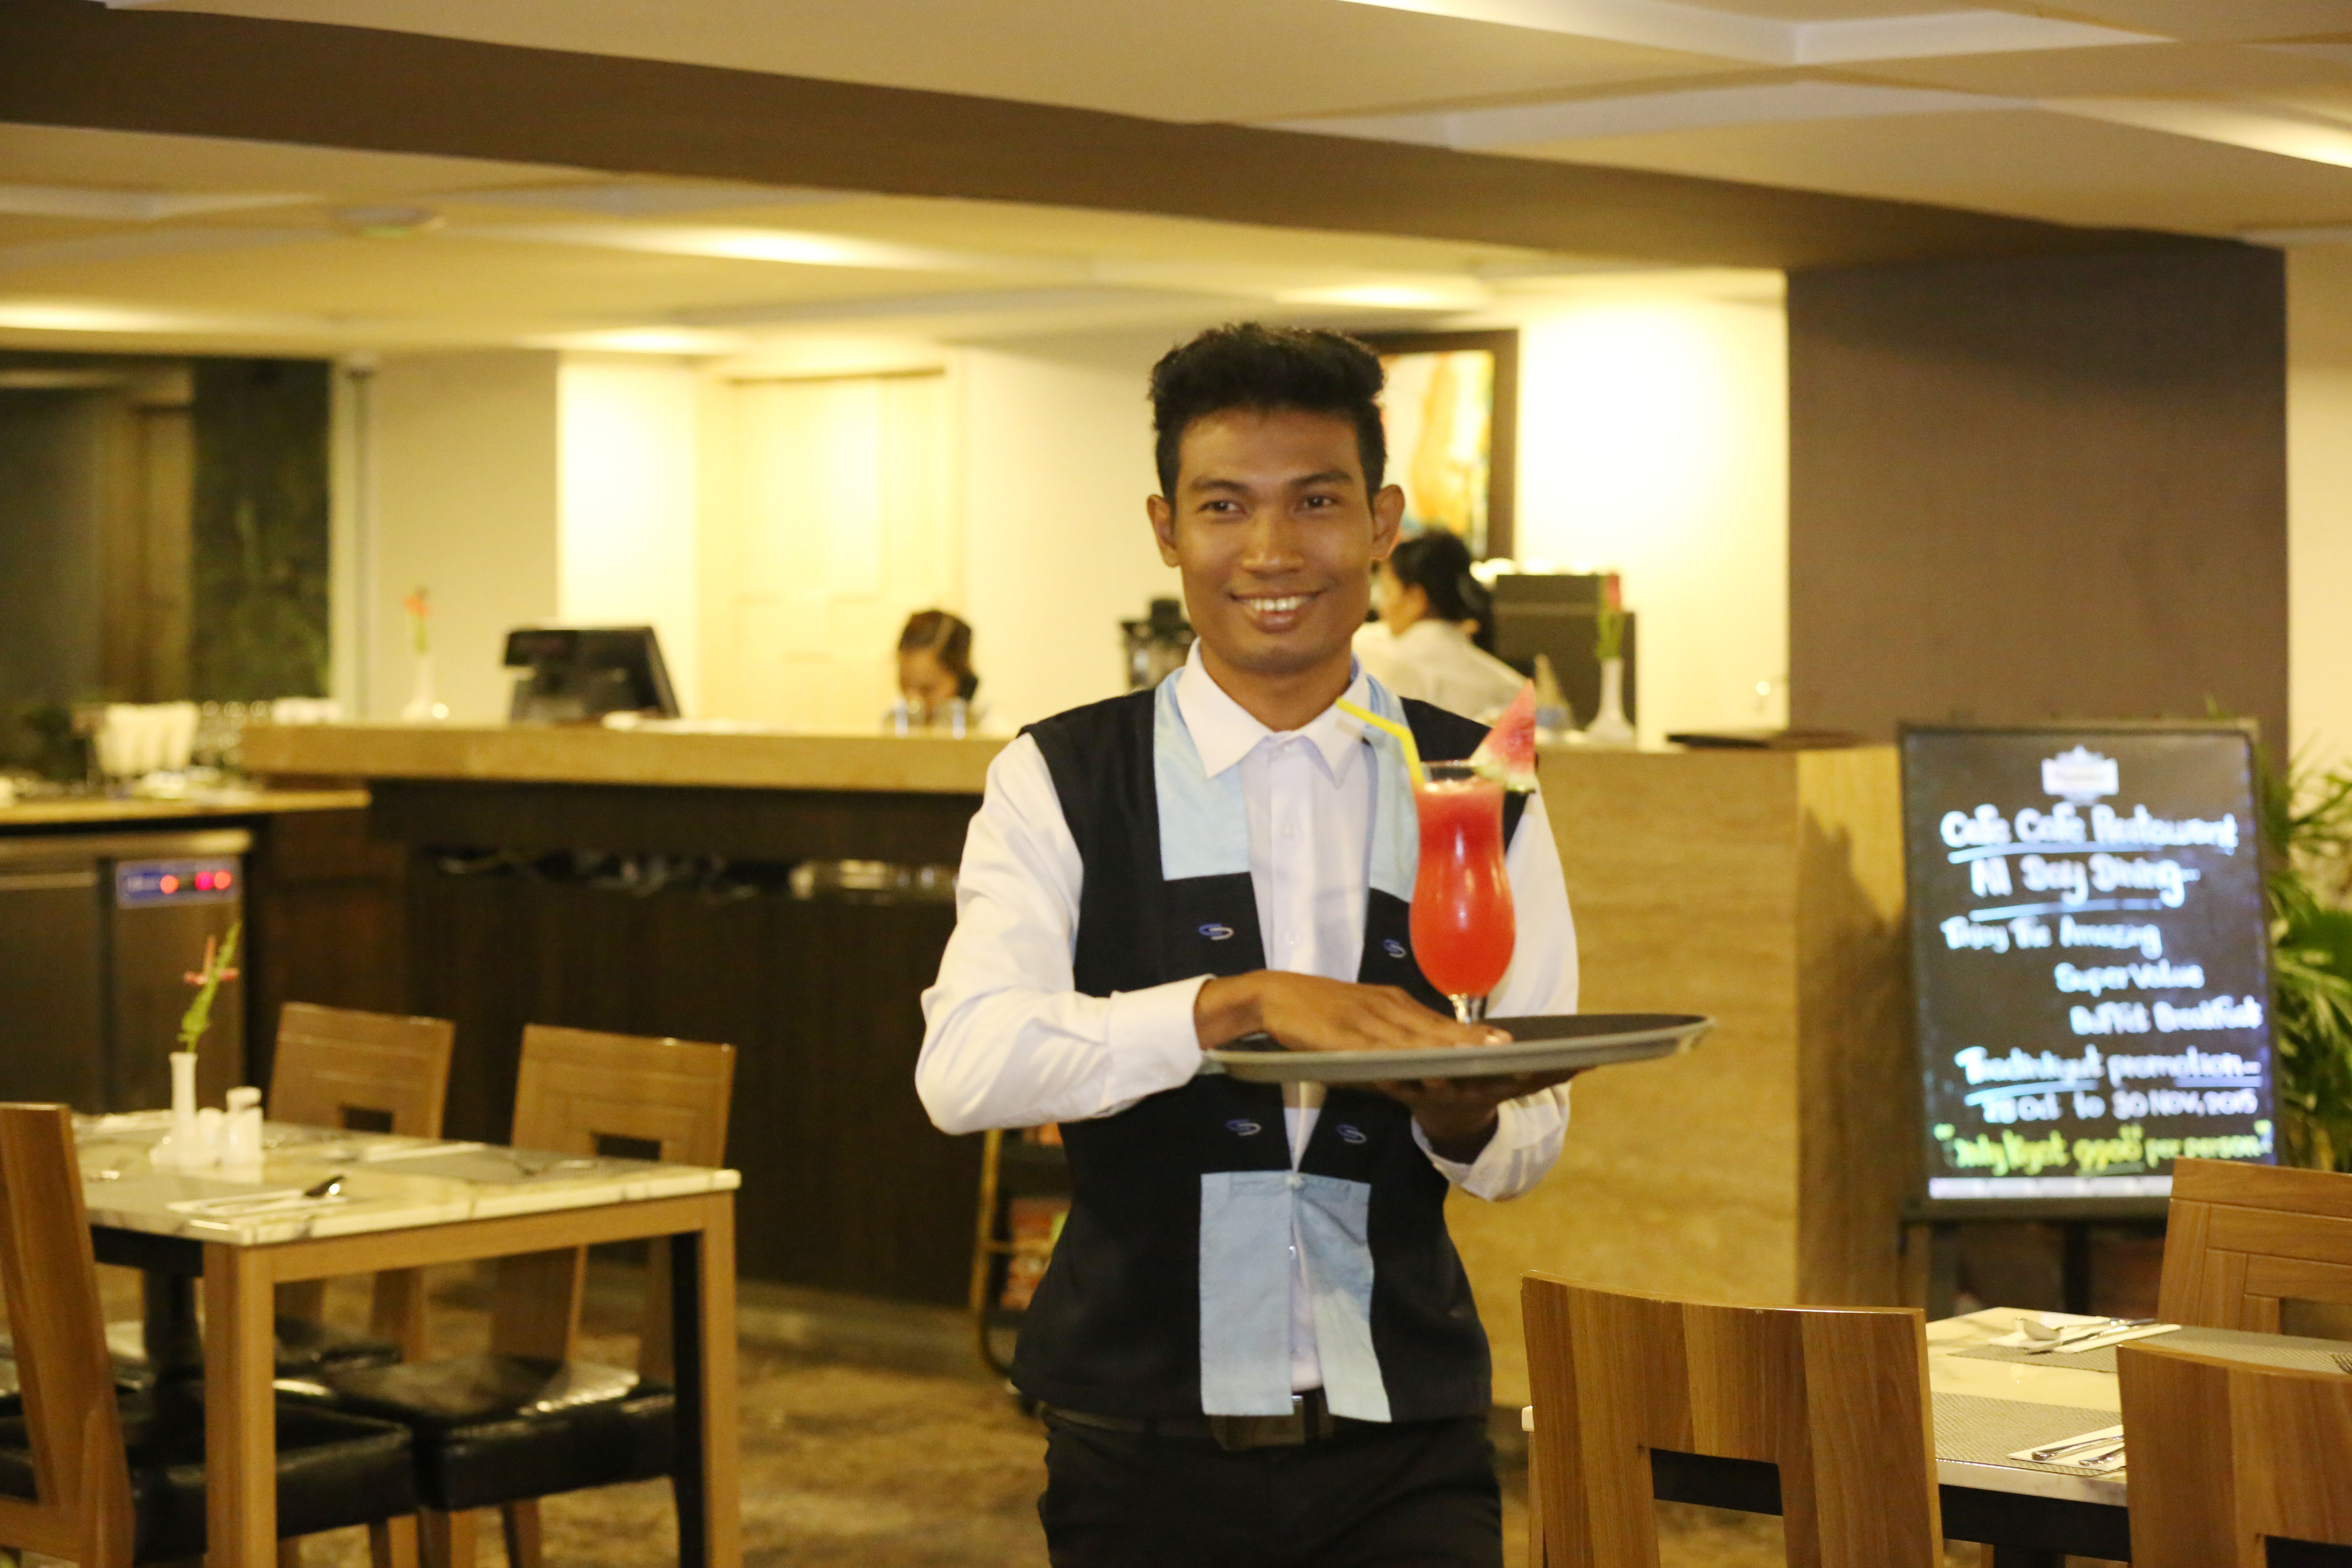 A young waiter smiles as he walks through a restaurant, holding a cocktail on a tray.